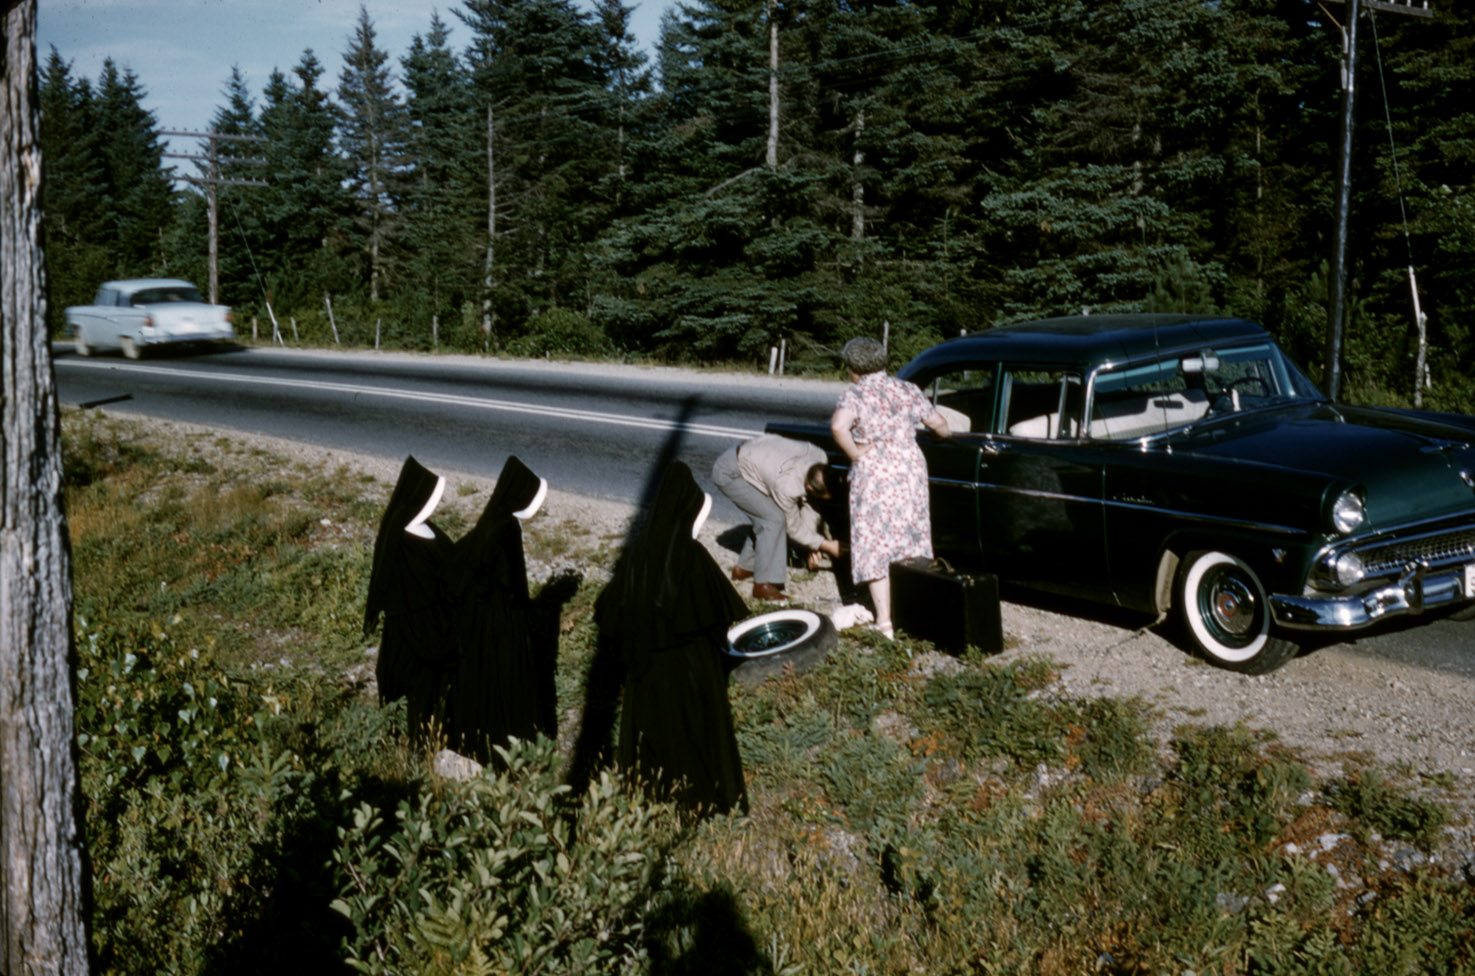 communityalbums - Sisters of Charity-Halifax looking on as a tire is changed on the way to Camp Villa Maria, Mahone Bay, Nova Scotia.